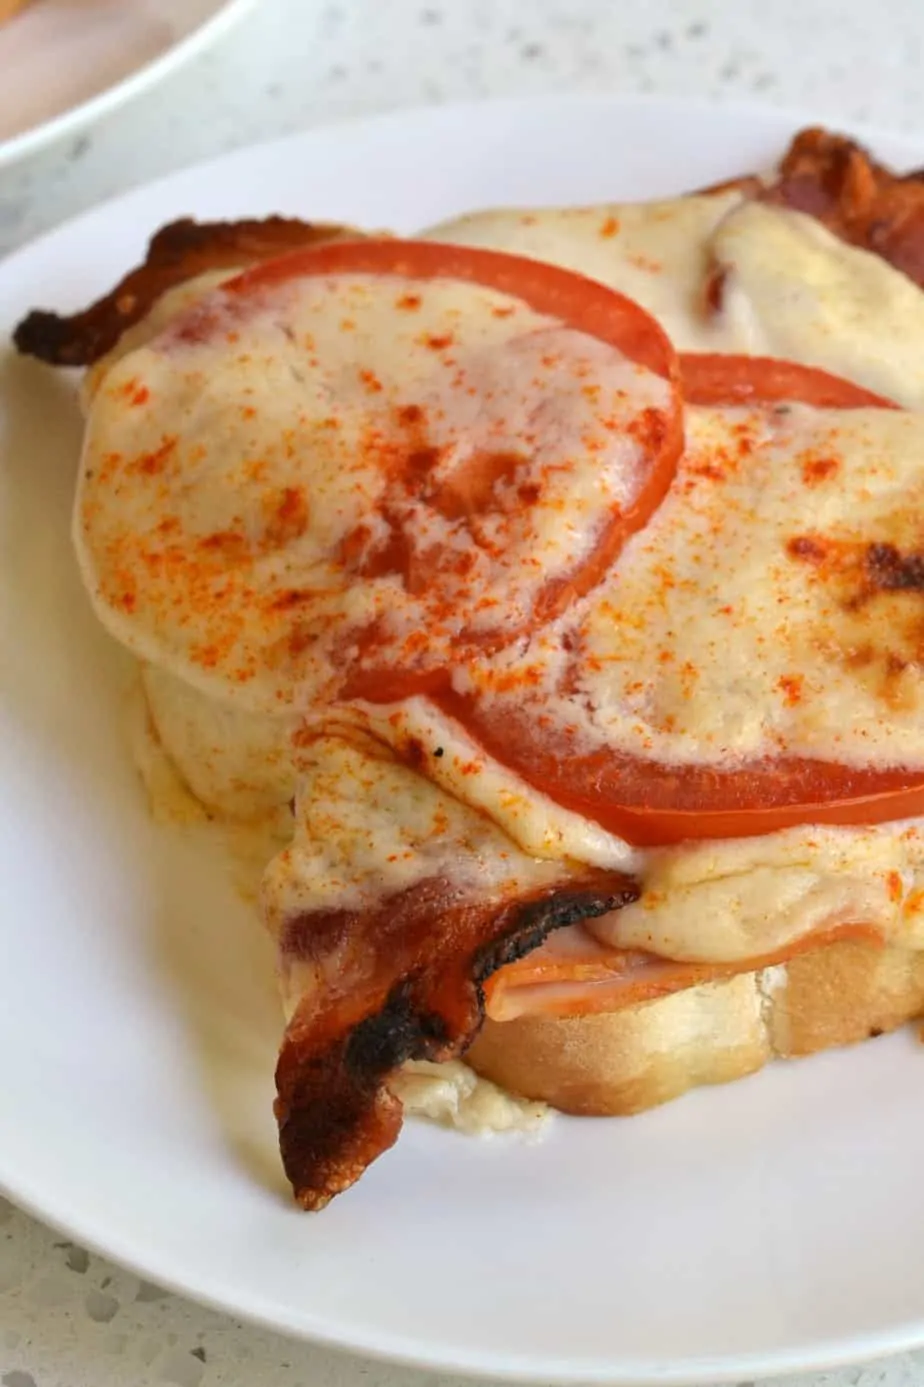 The Hot Brown is an open faced sandwich layered with turkey, crisp bacon, sun ripened tomatoes and creamy cheese sauce.